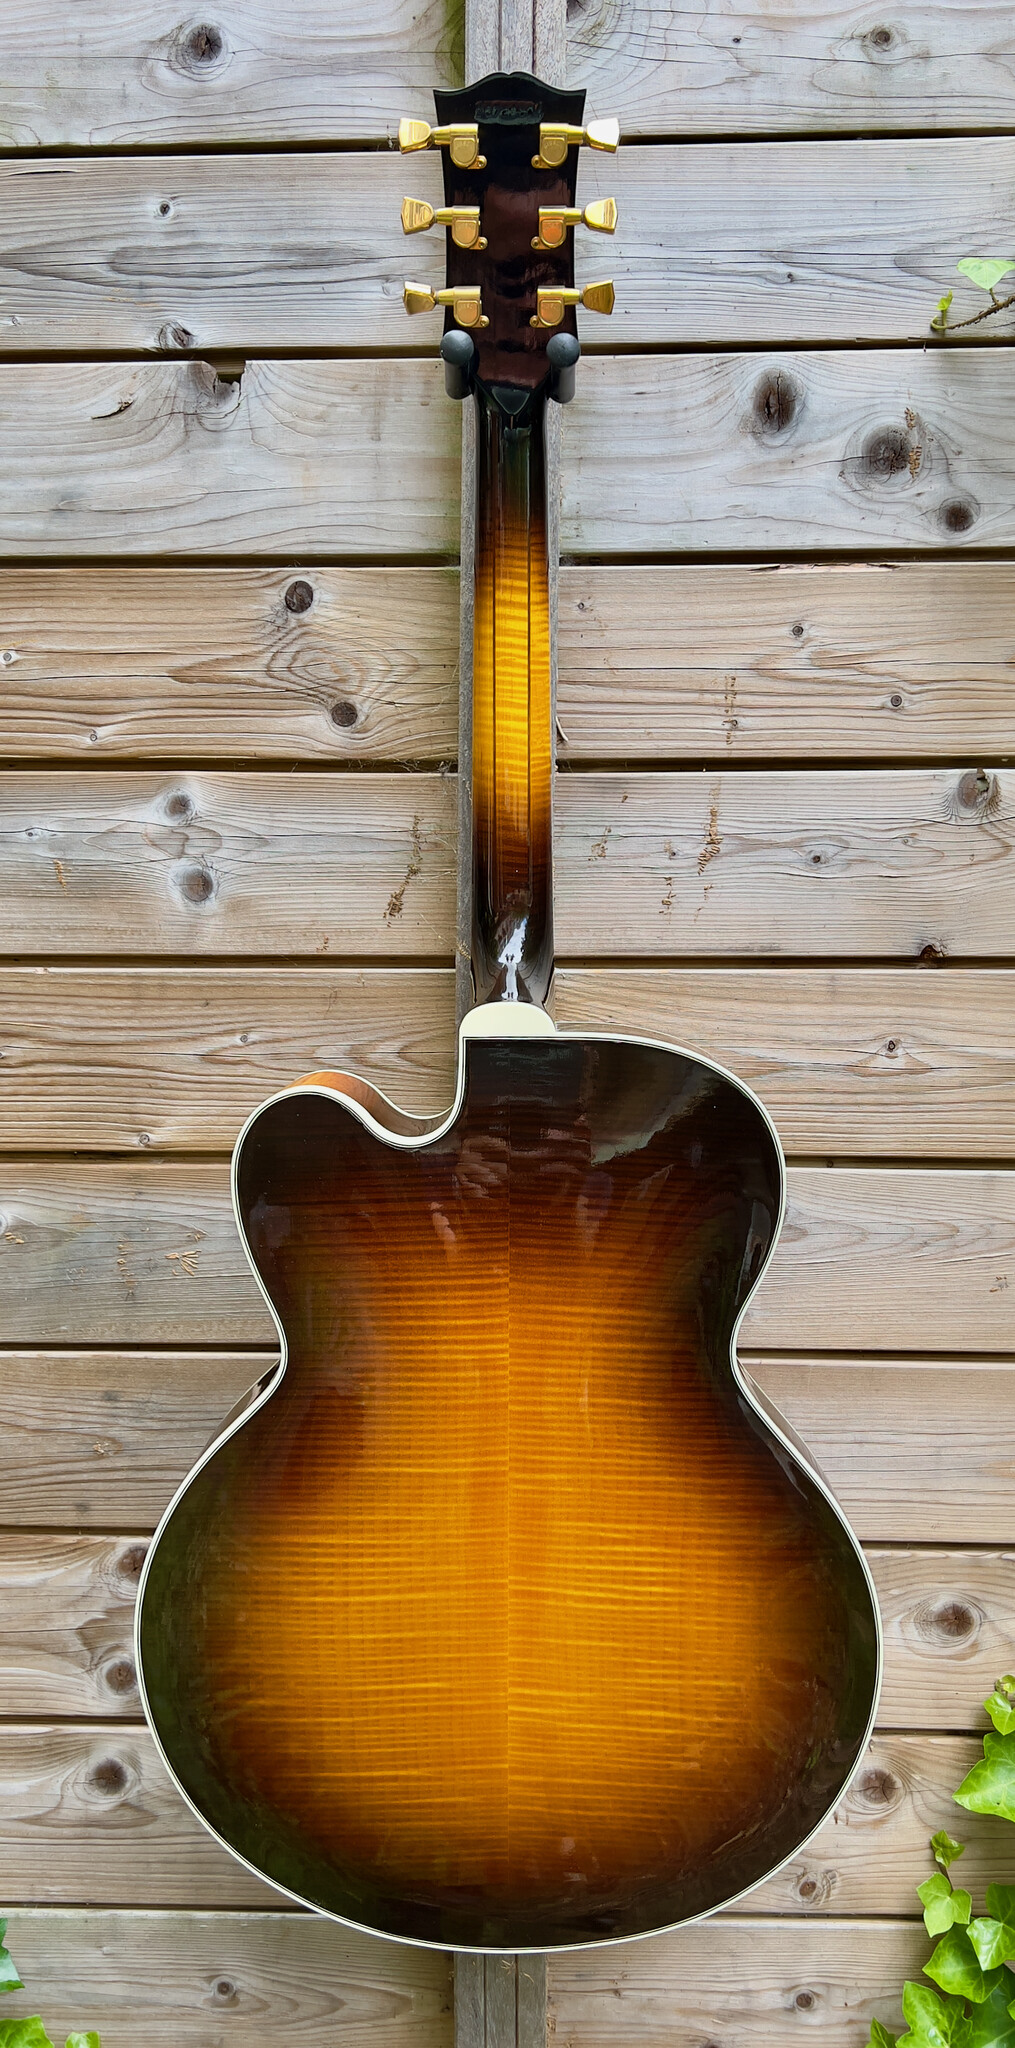 Gibson Gibson L5 (ZIE OMSCHRIJVING)